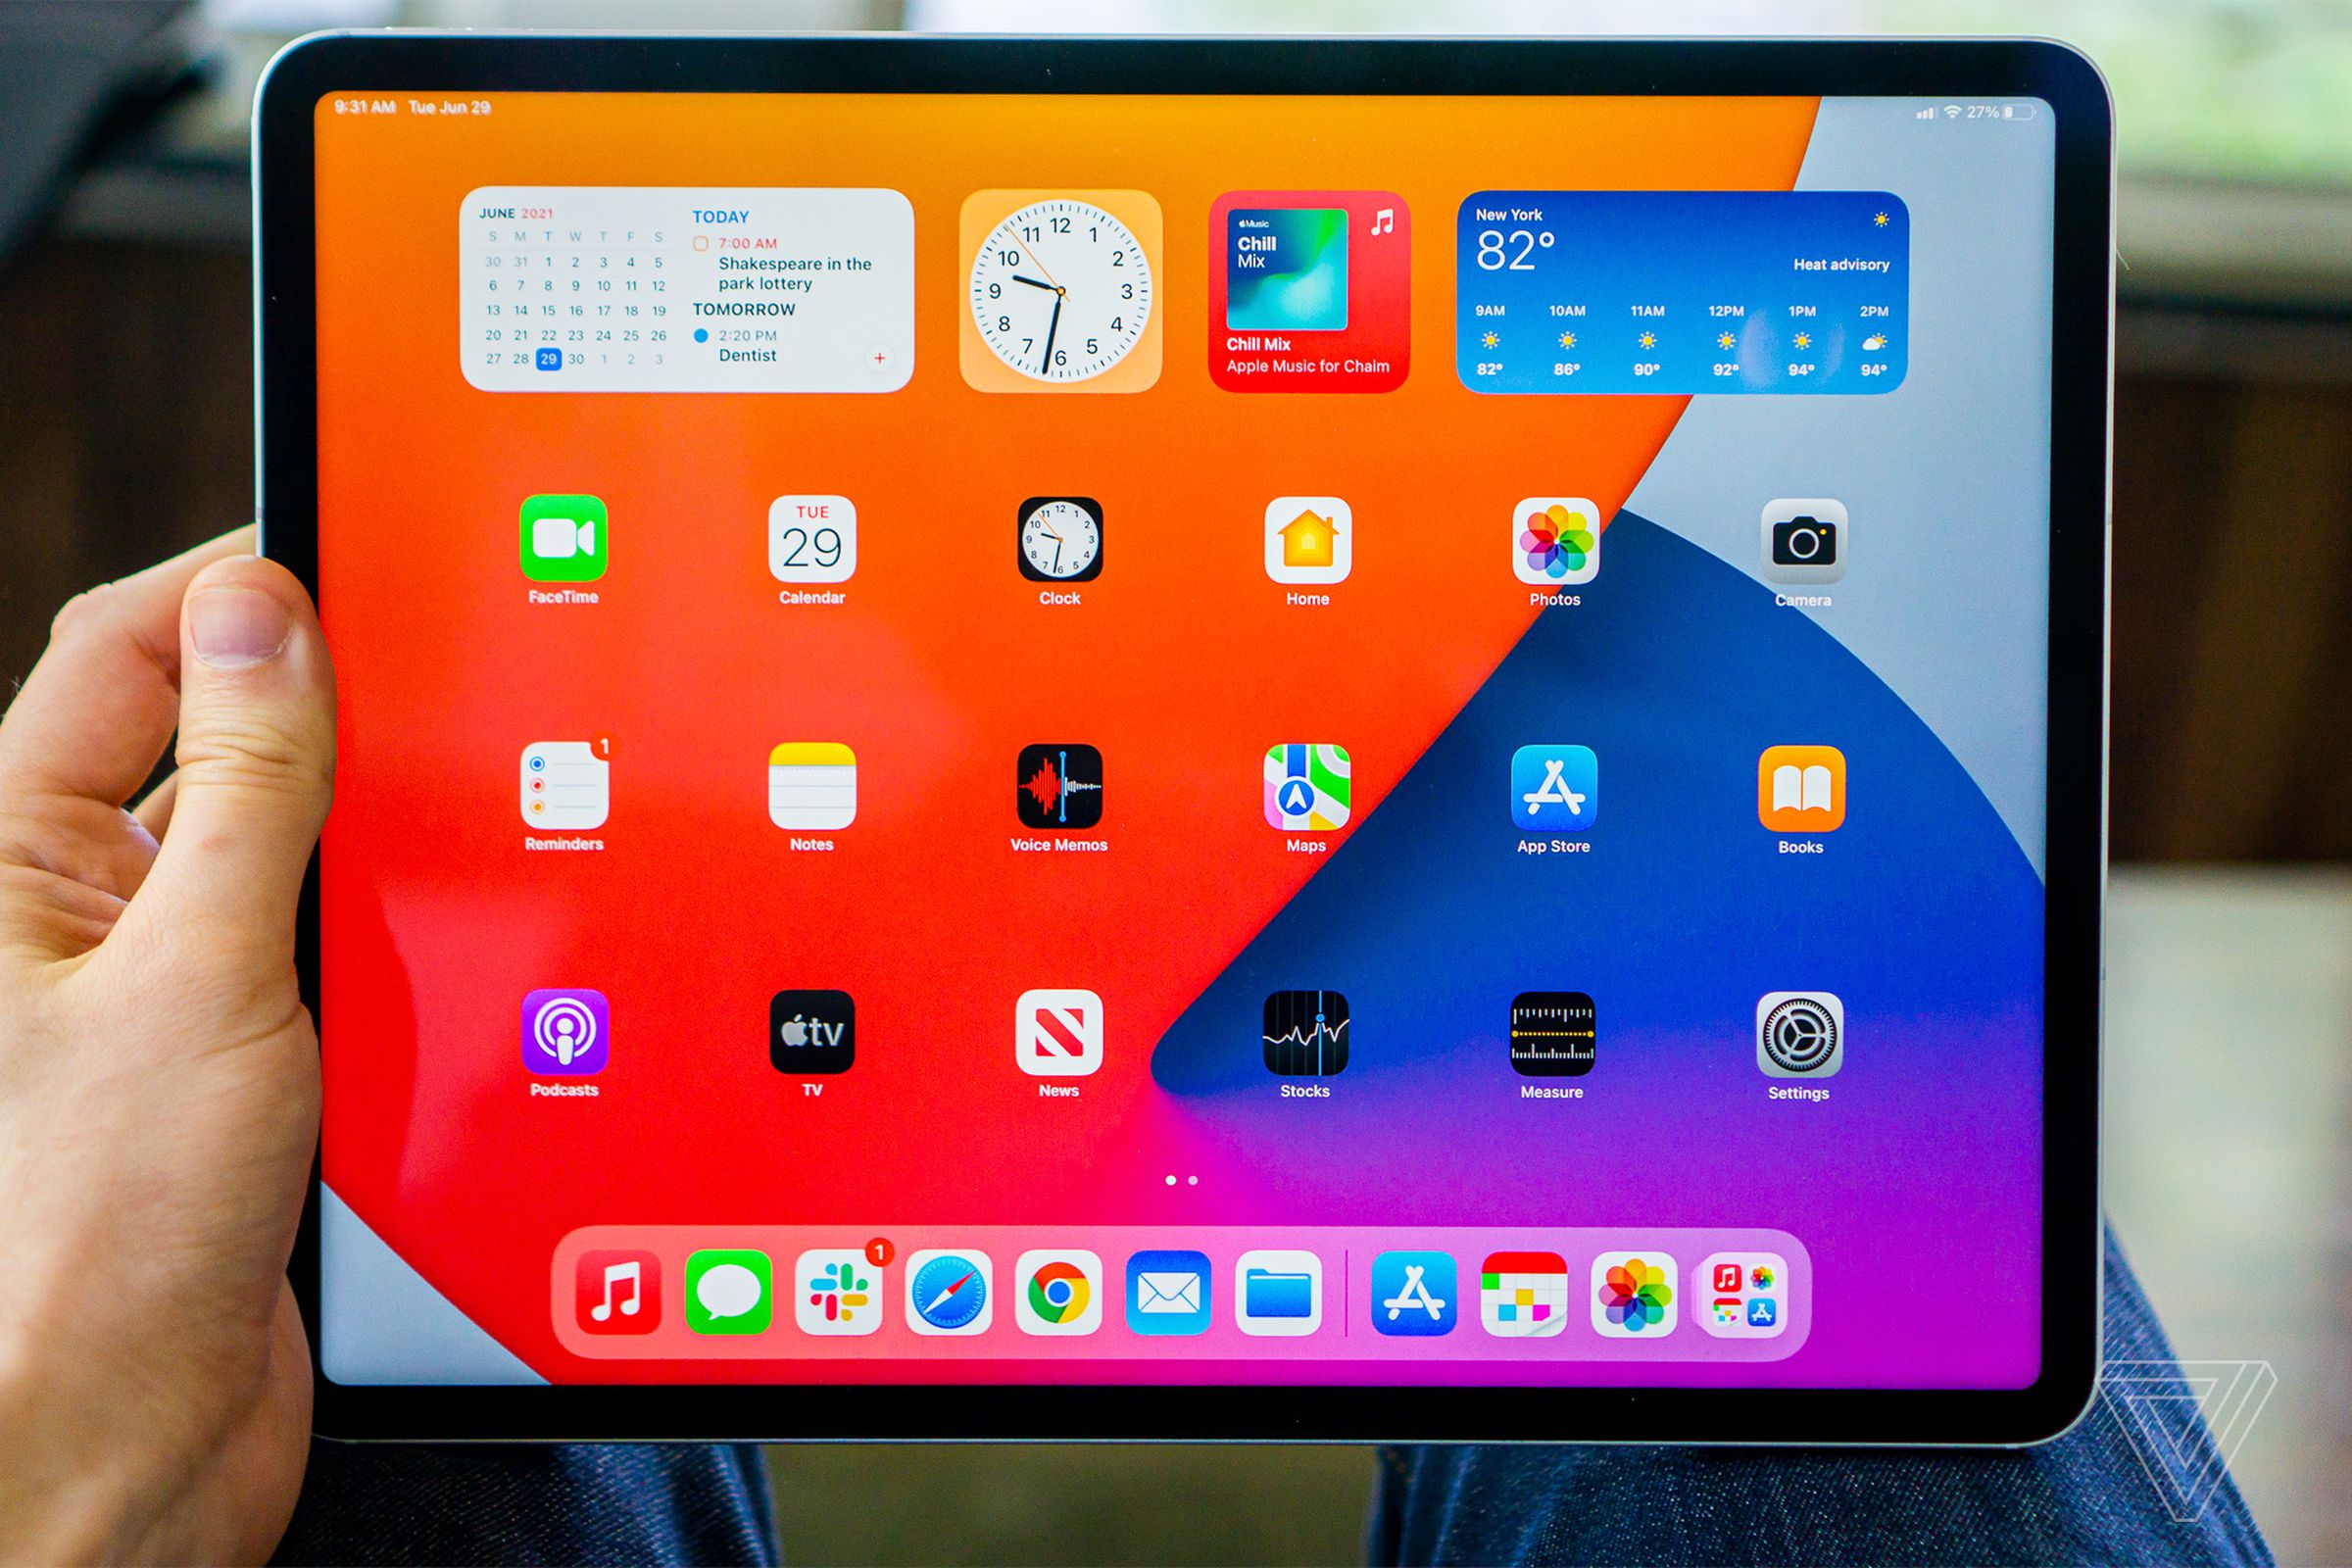 iPadOS 15 allows for widgets on the homescreen now.